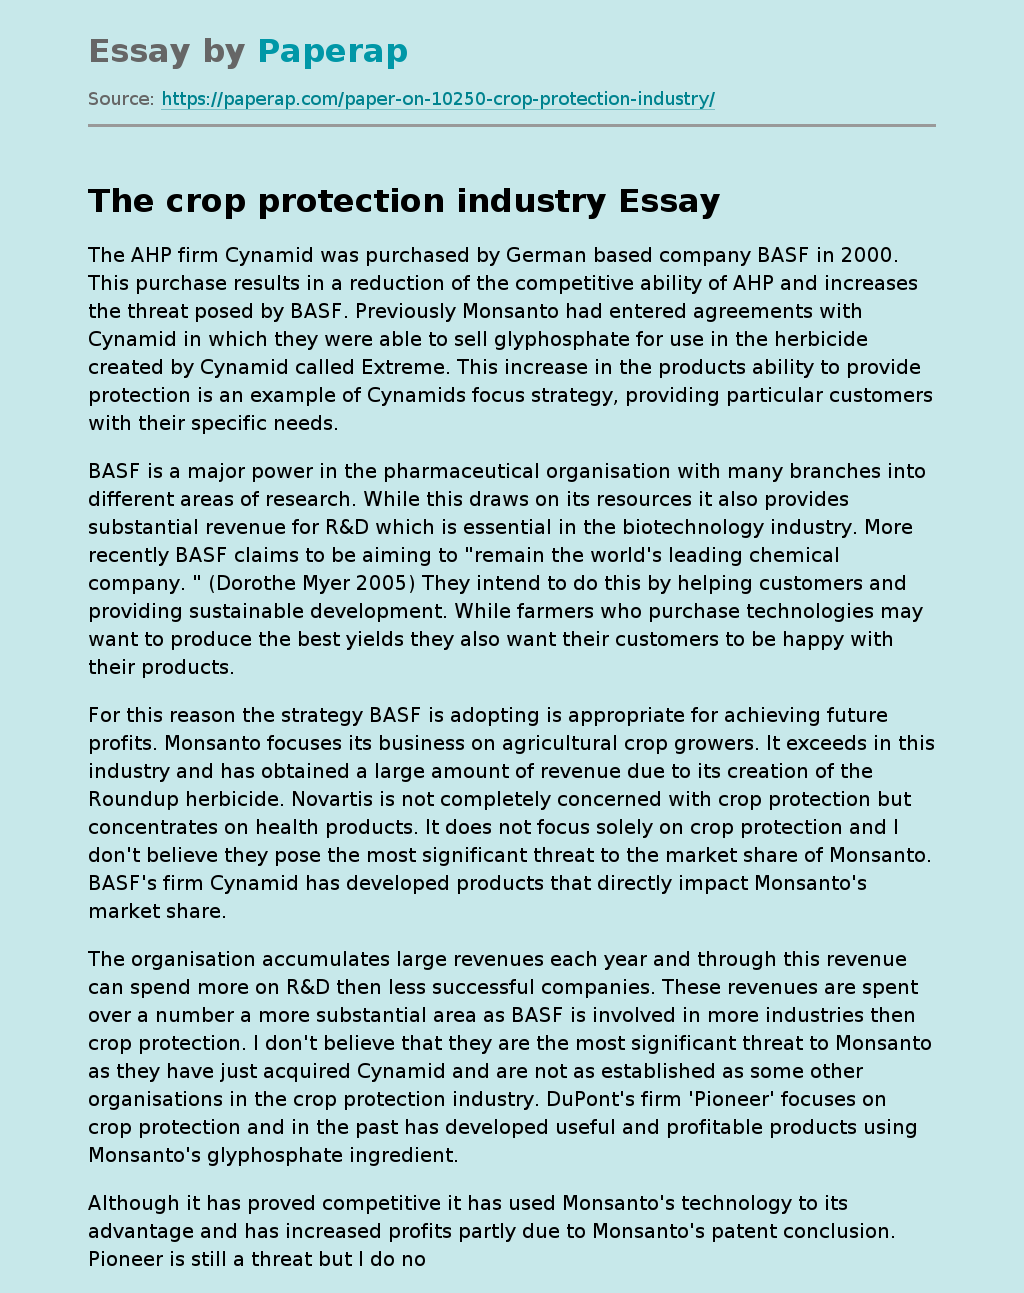 The Crop Protection Industry